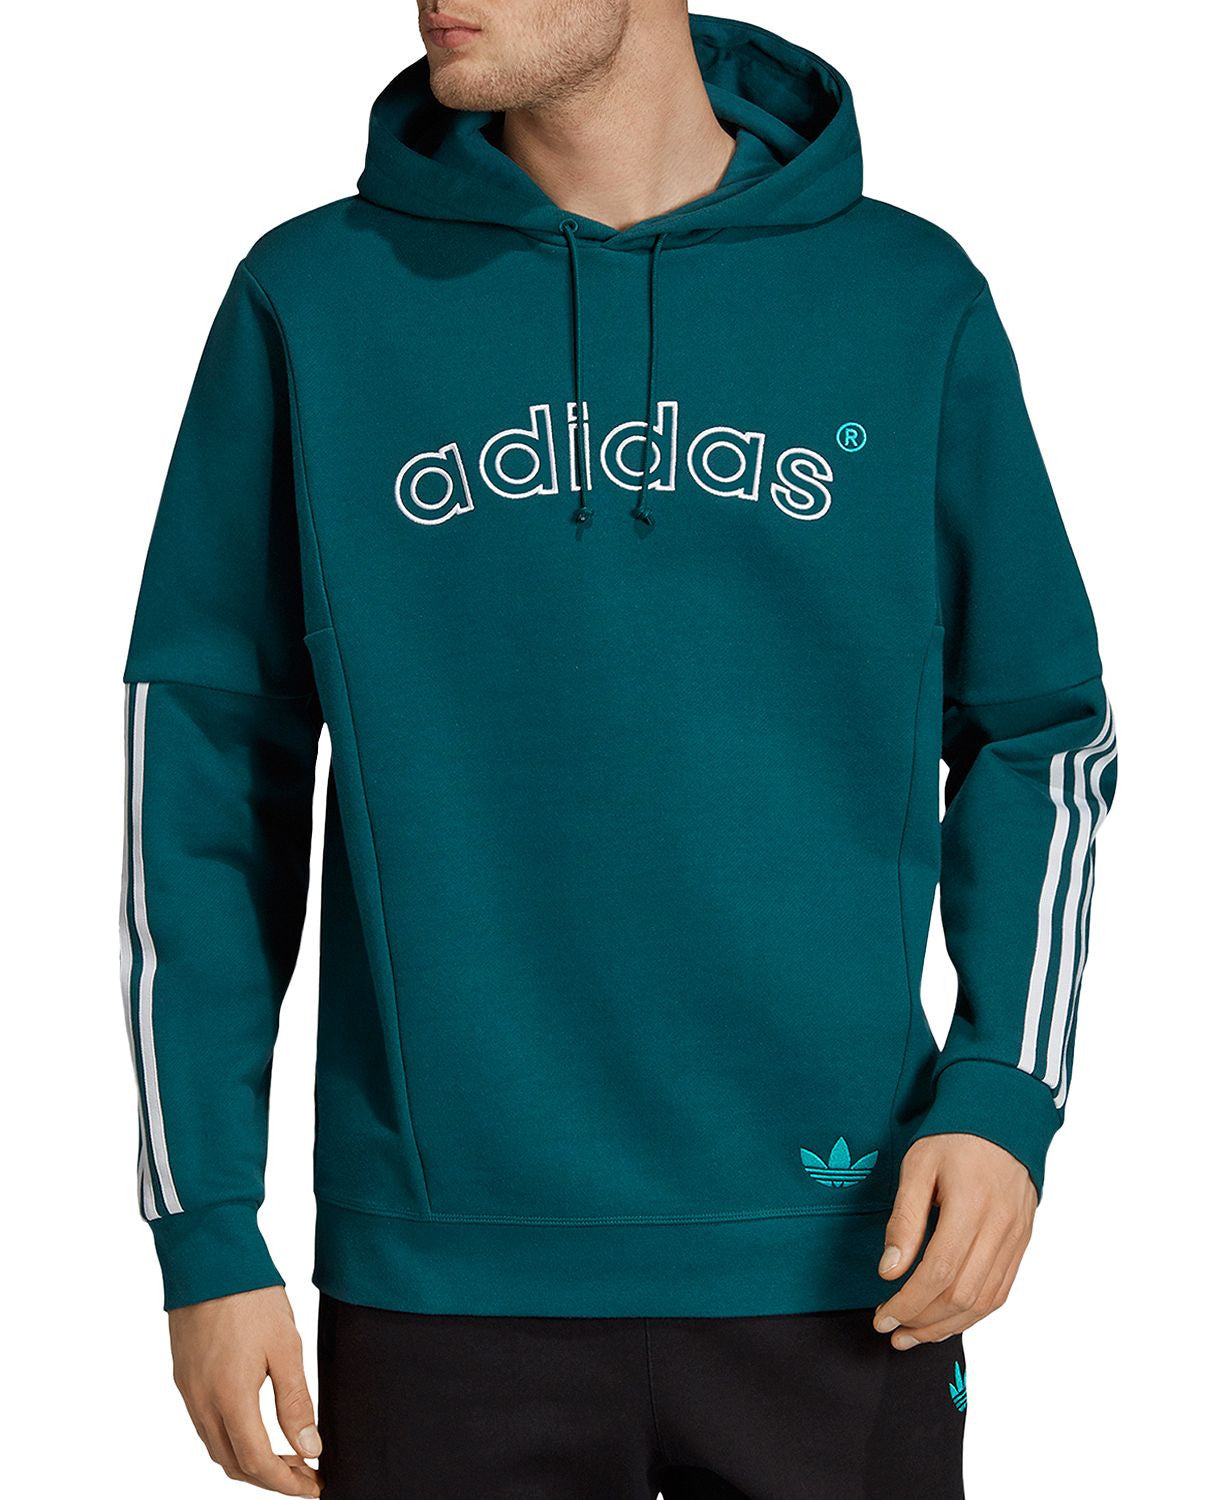 Adidas Originals Archive Hooded French Terry Sweatshirt Rich Green